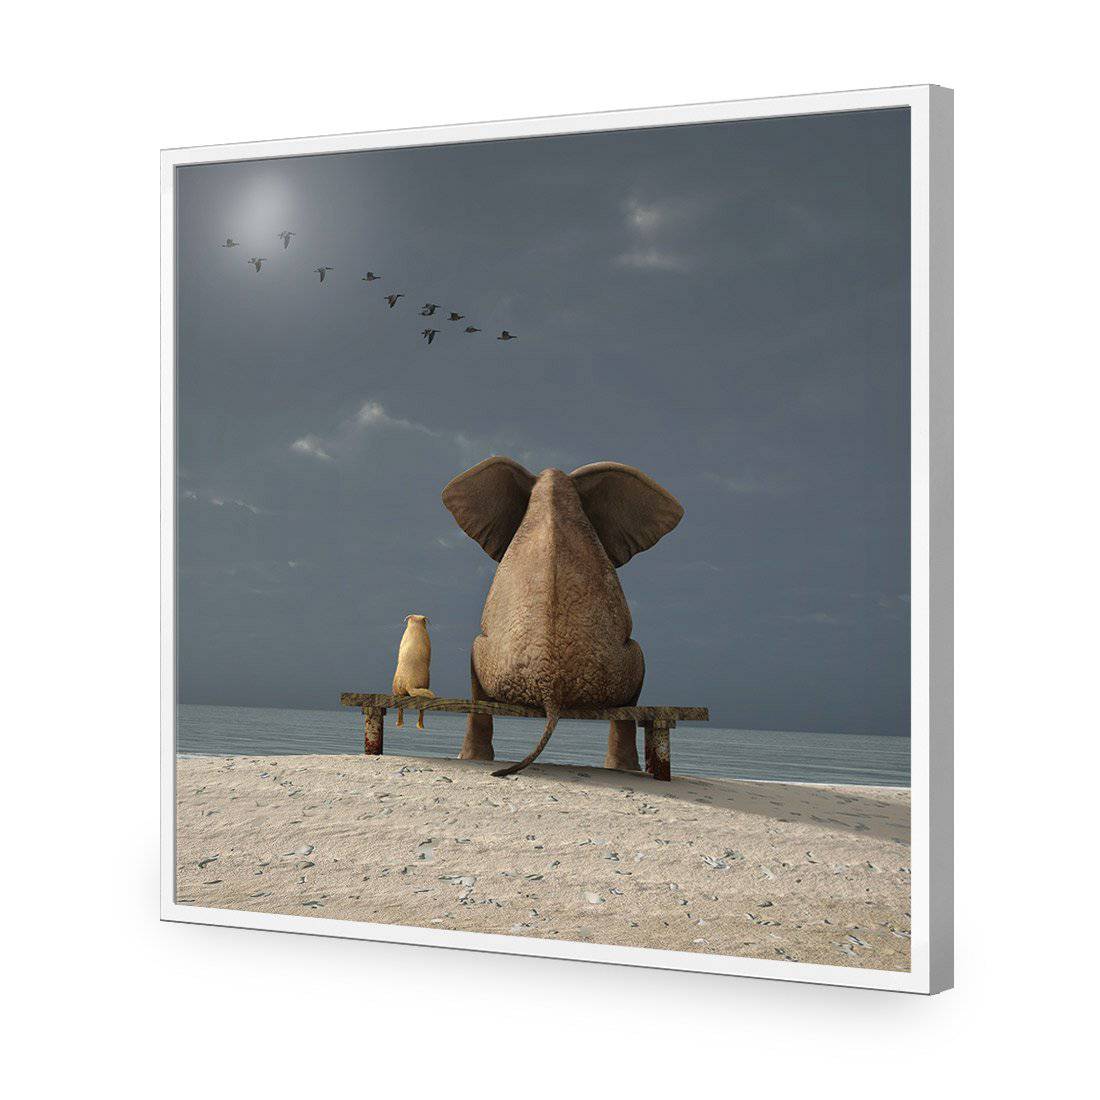 Little And Large, Square-Acrylic-Wall Art Design-Without Border-Acrylic - White Frame-37x37cm-Wall Art Designs